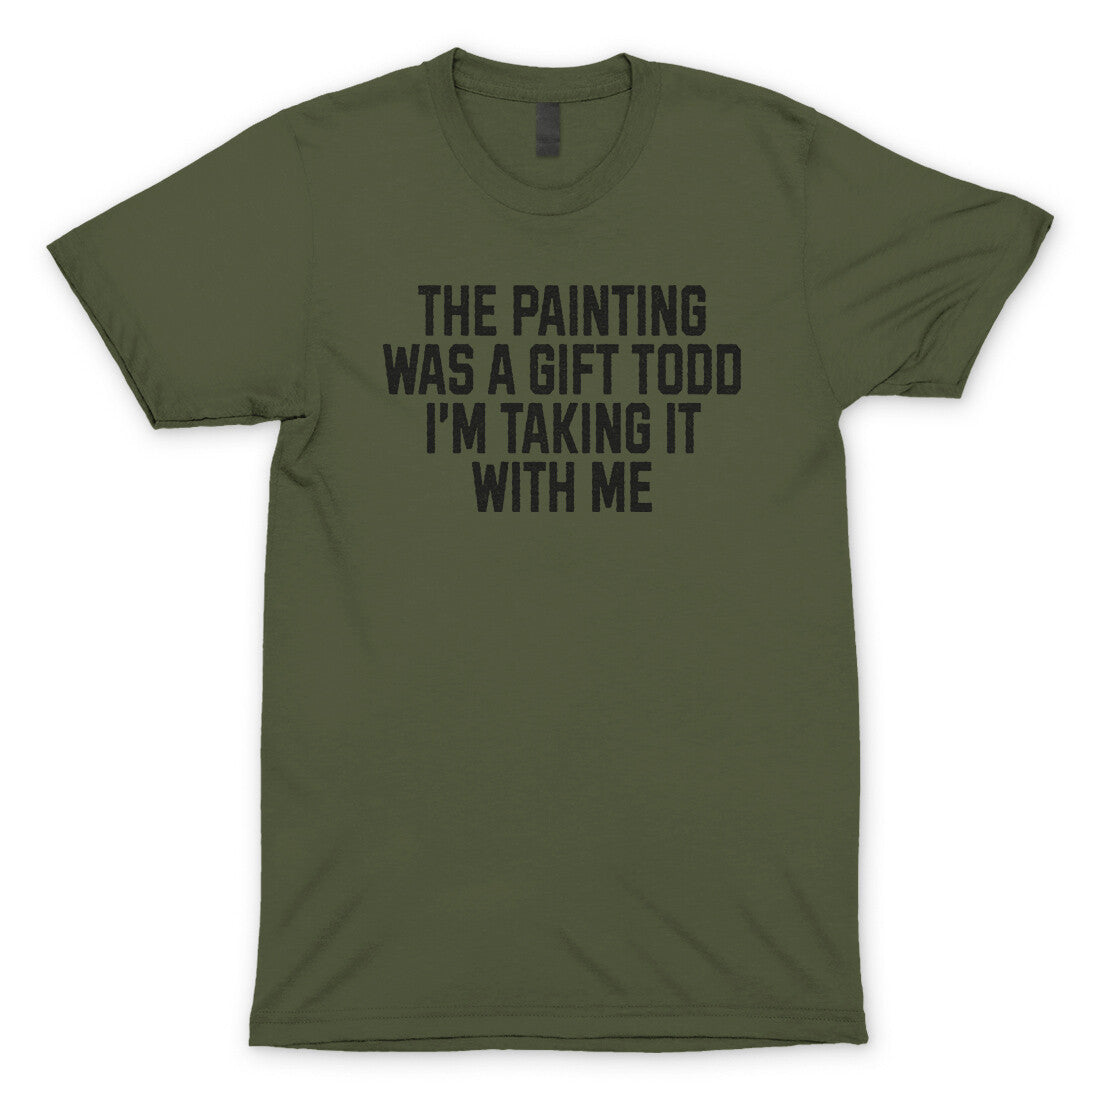 The Painting was a Gift Todd I'm Taking it With Me in Military Green Color